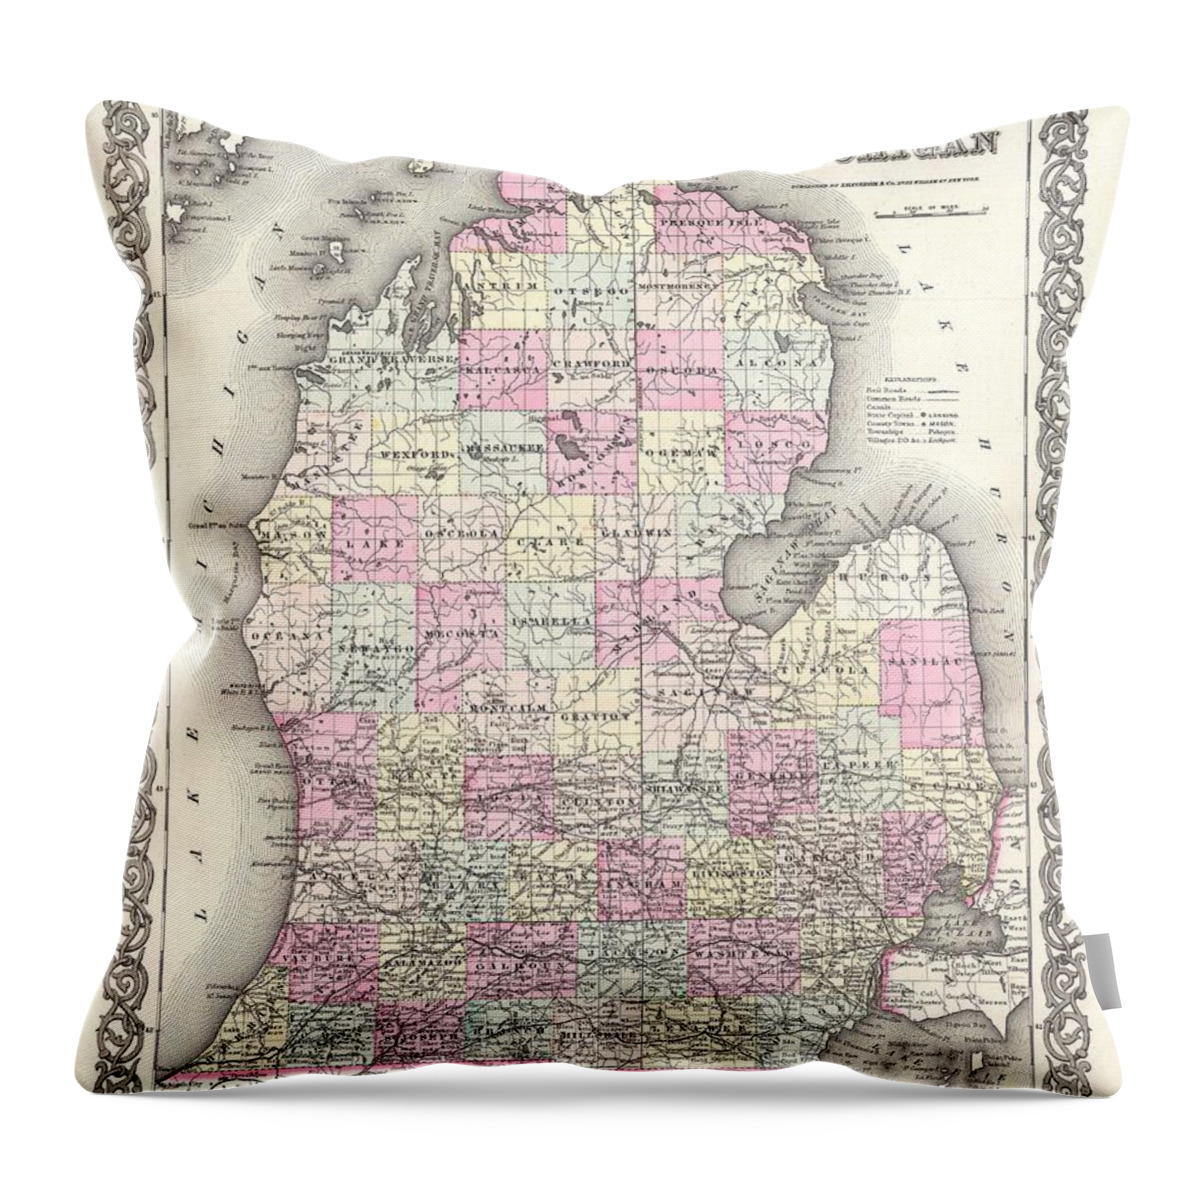 Antique Map Of Michigan Throw Pillow featuring the drawing Antique Maps - Old Cartographic maps - Antique Map of Michigan, 1855 by Studio Grafiikka